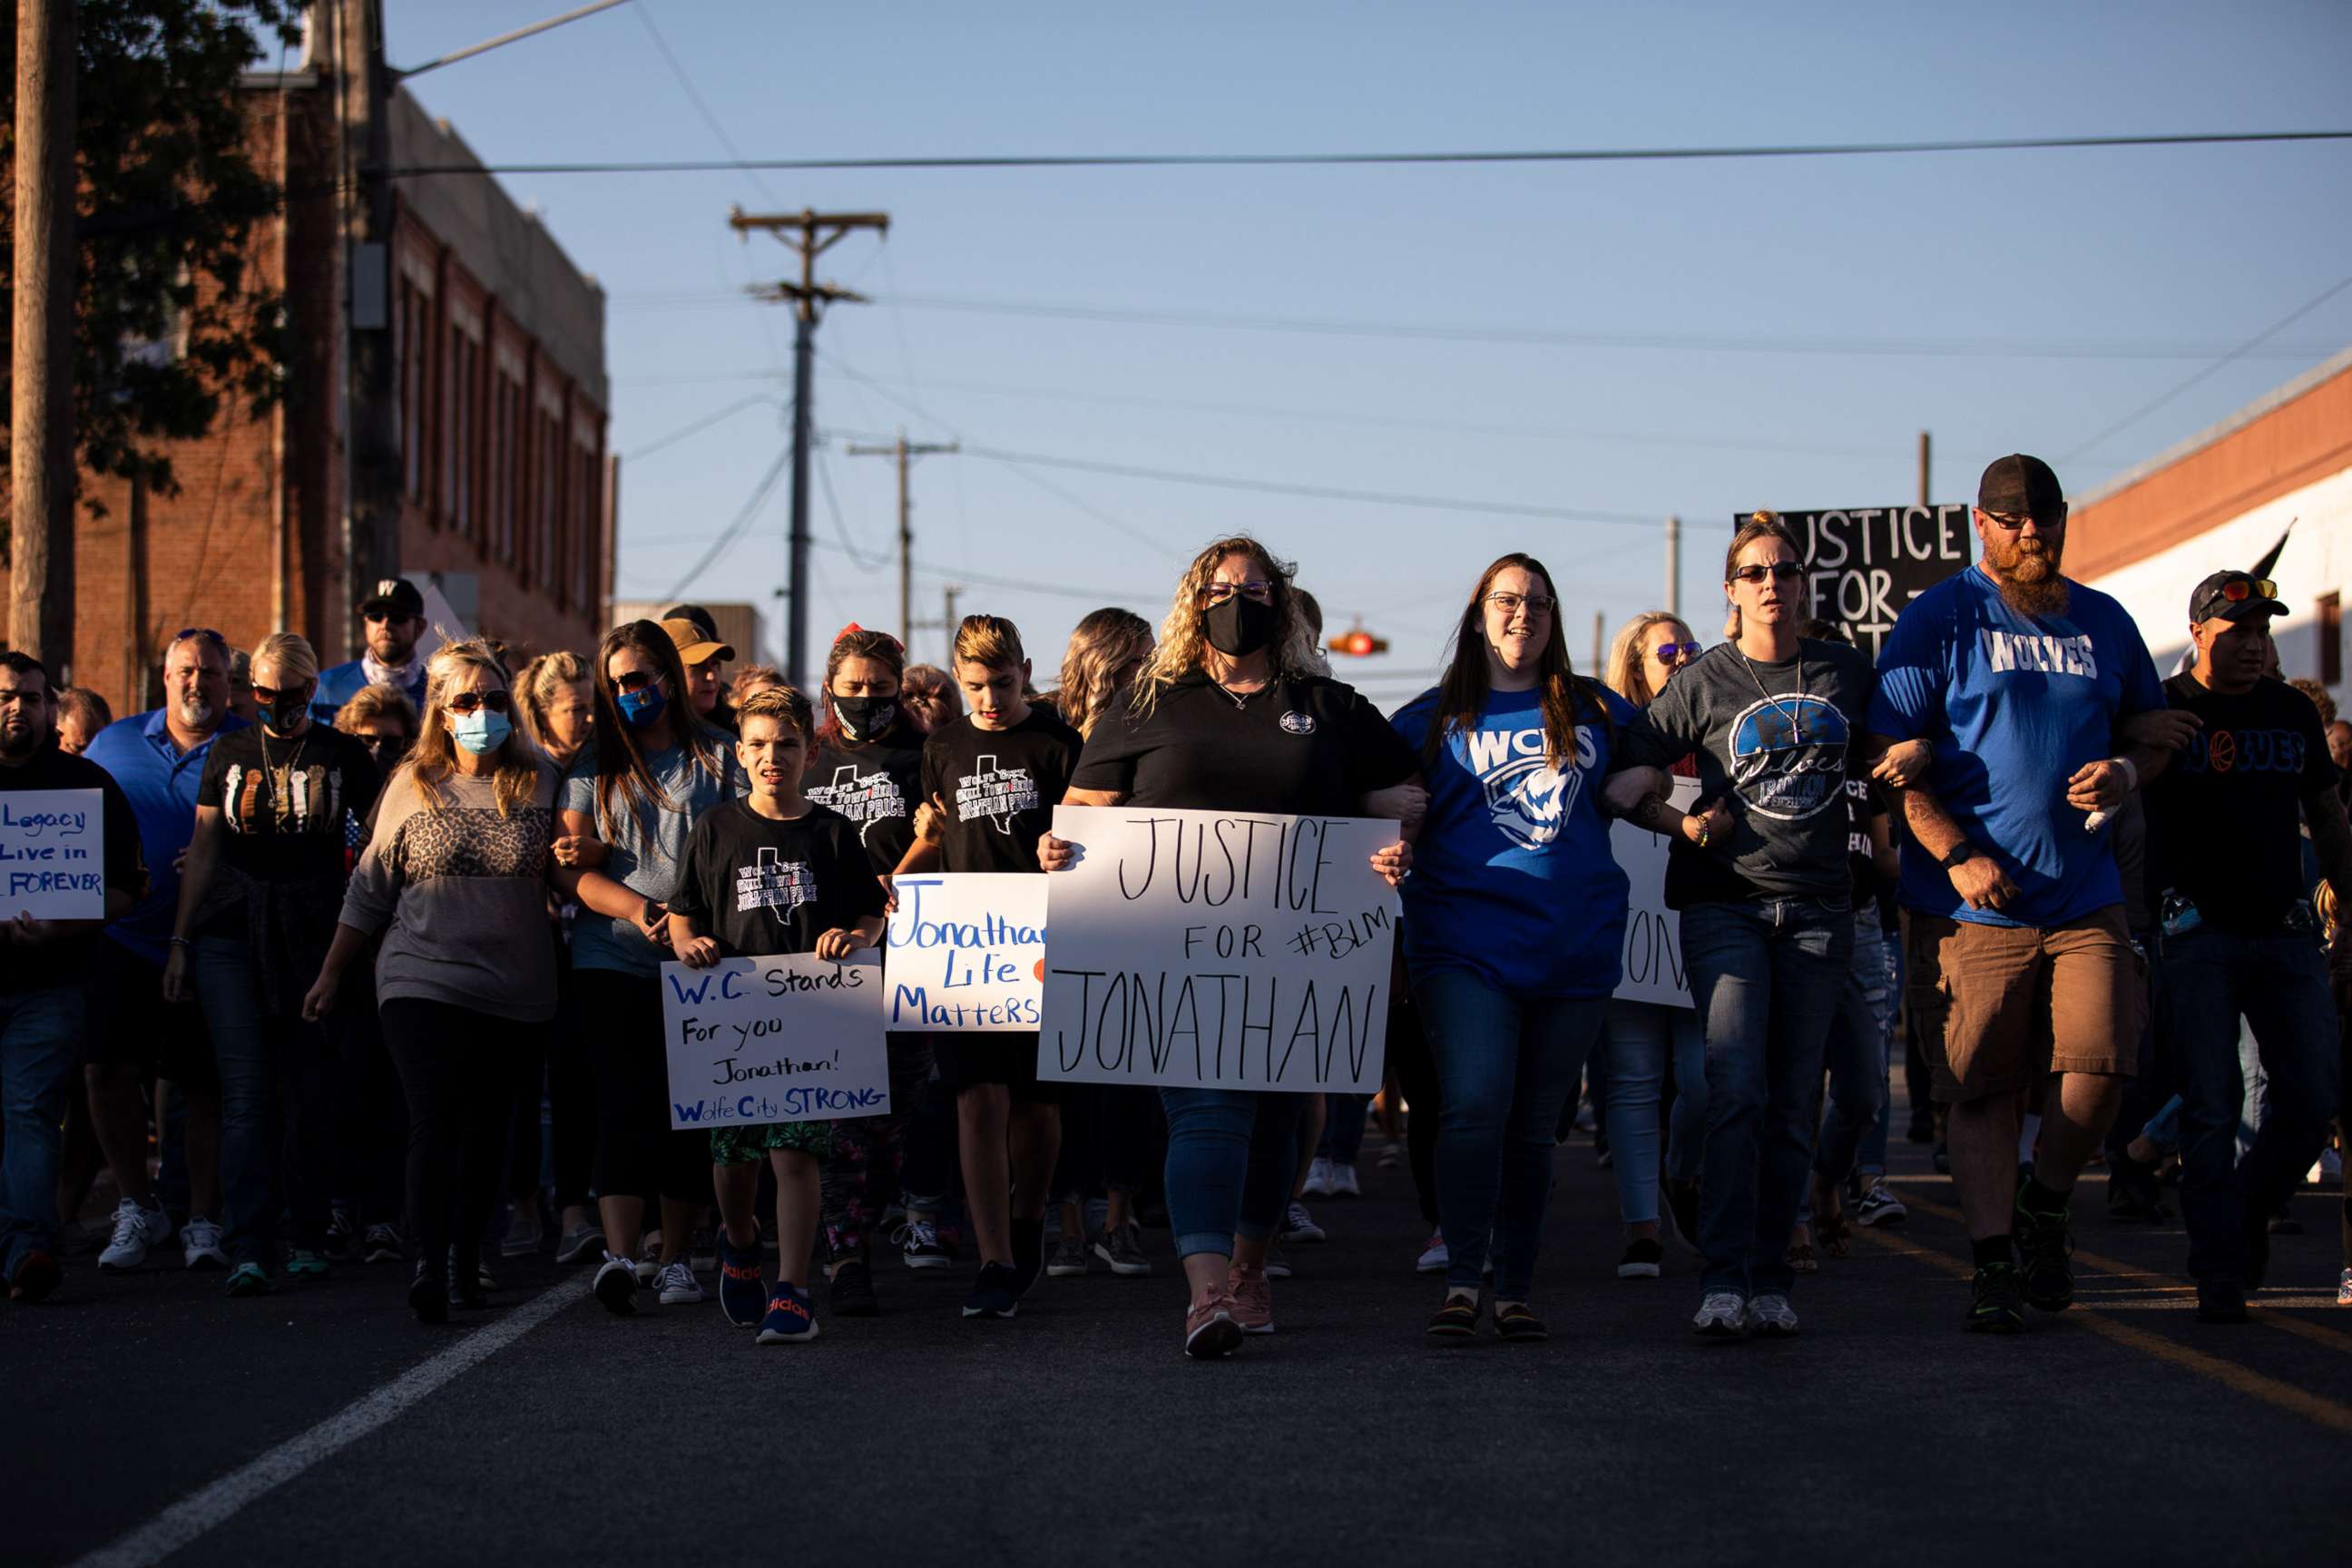 PHOTO: People gather for a march, rally and candle light vigil in honor Jonathan Price on Oct. 5, 2020 in Wolfe City, Texas.